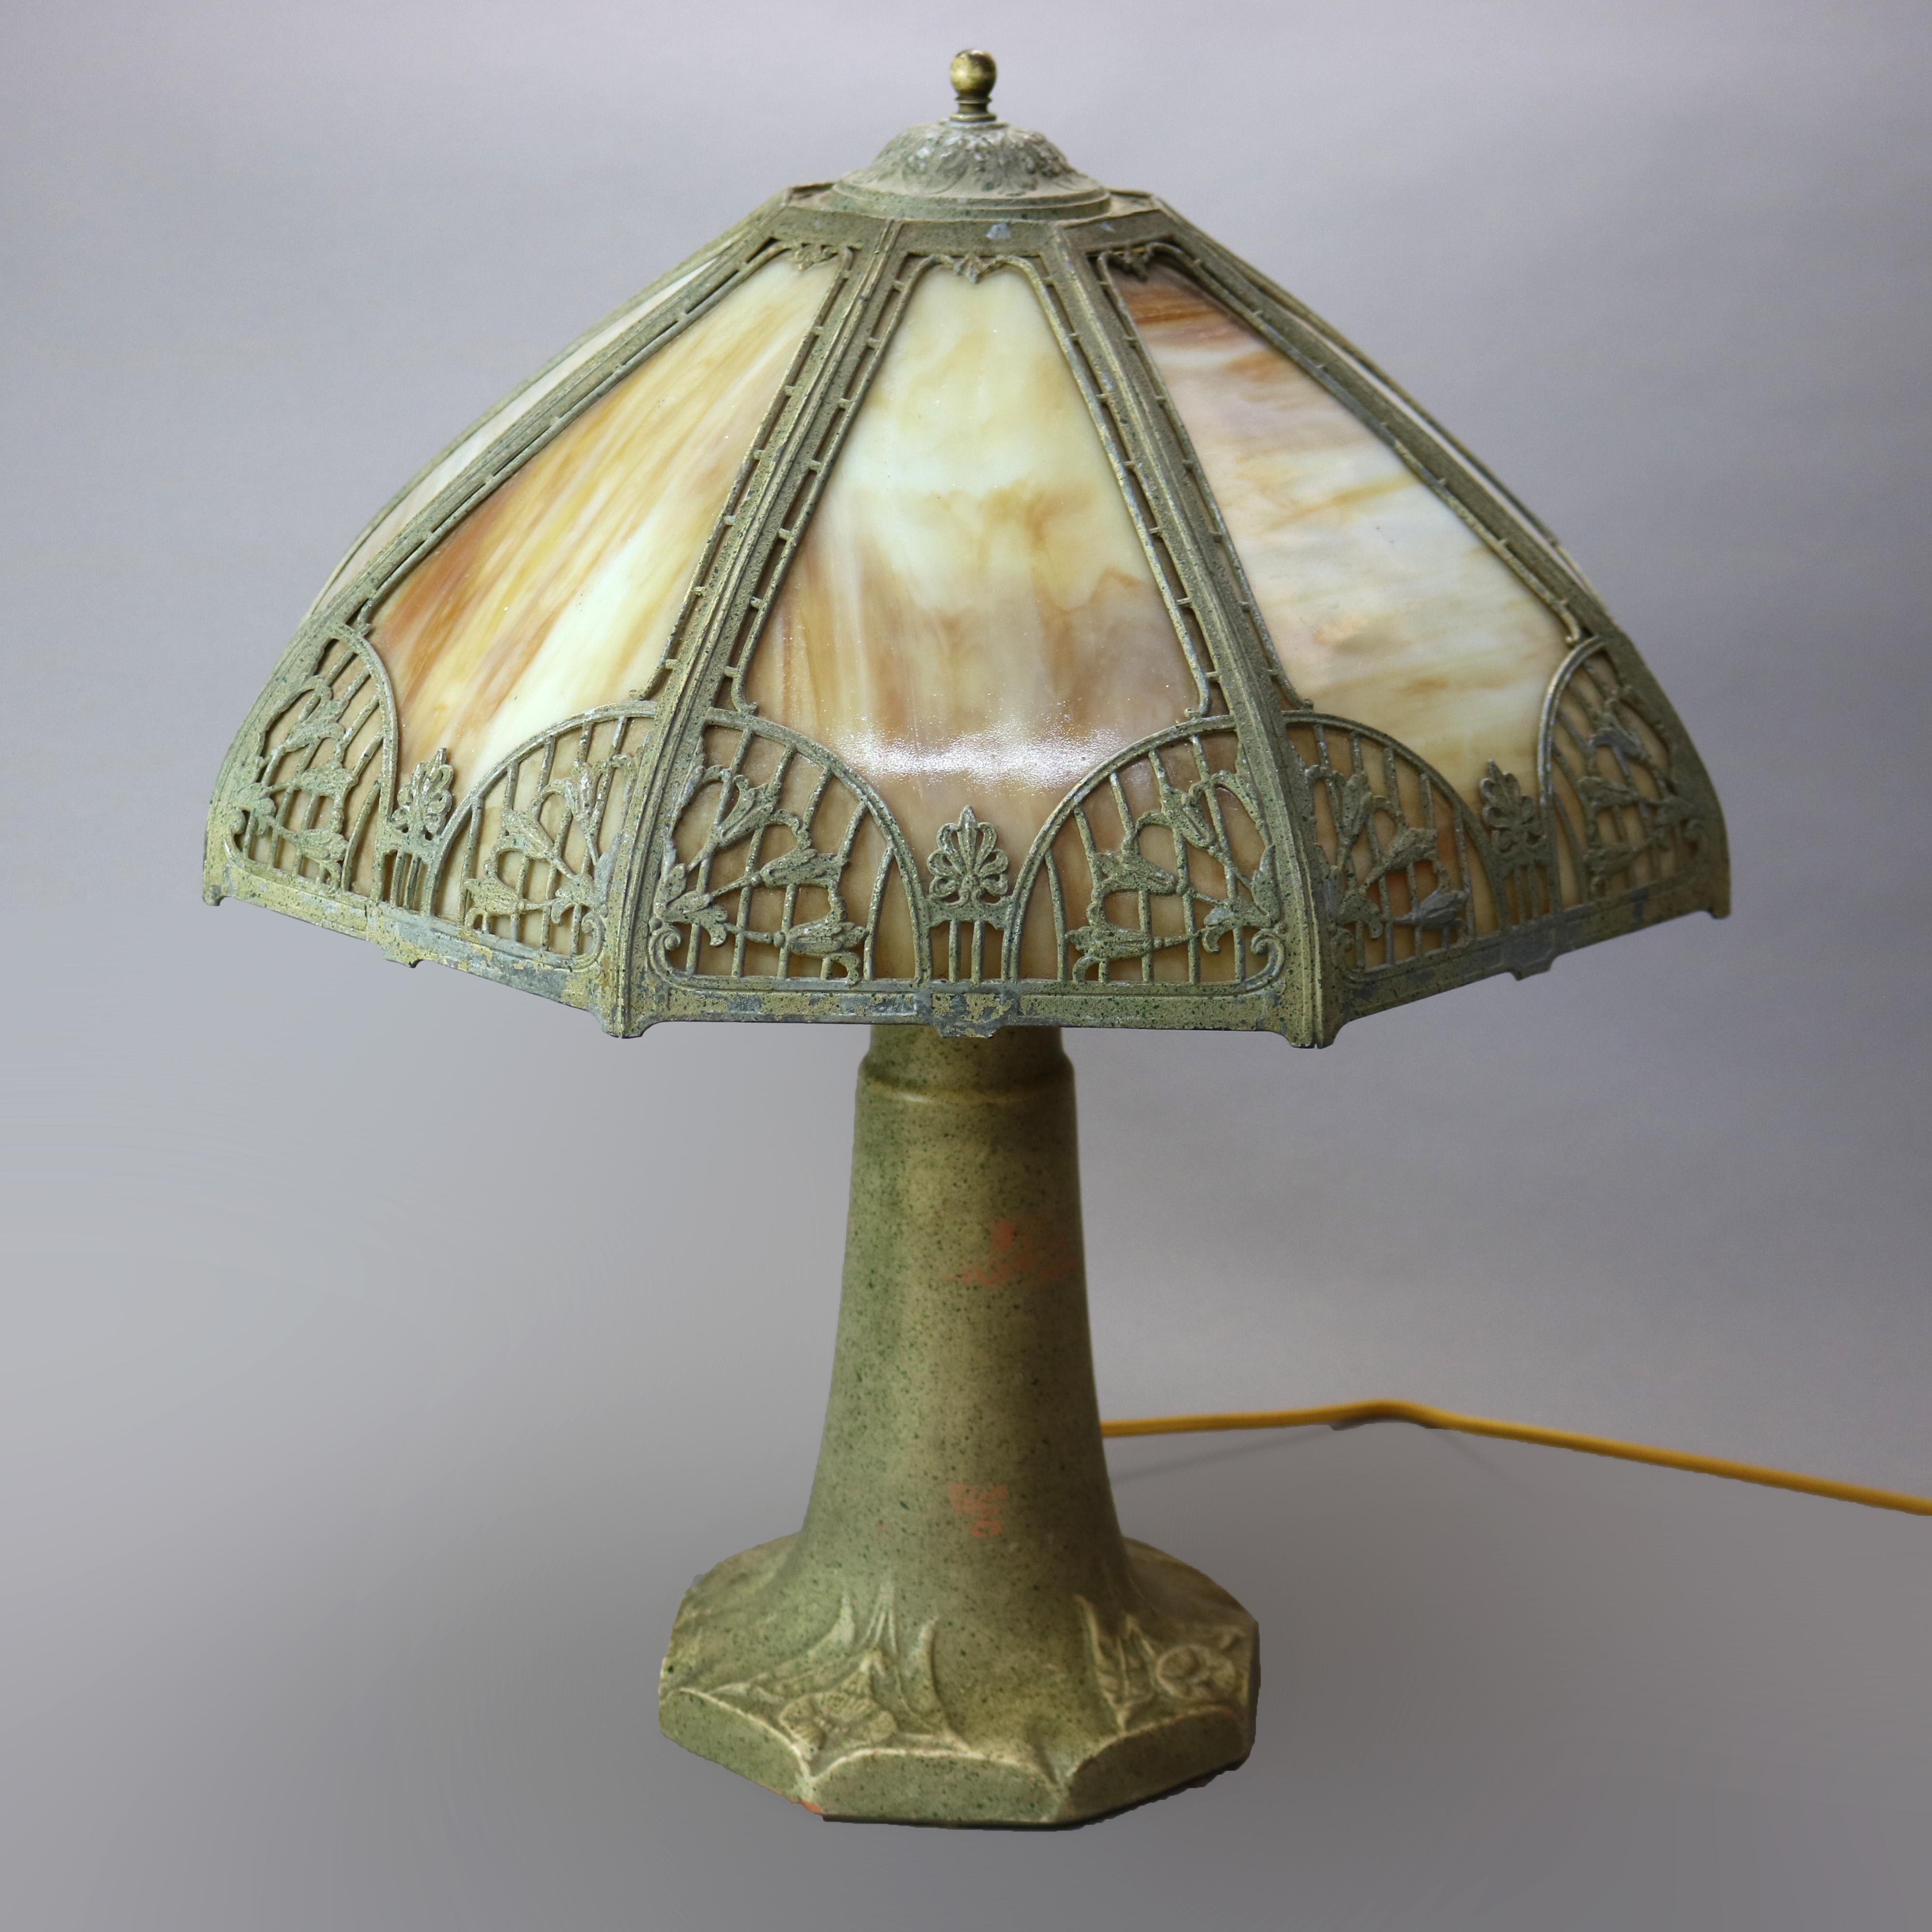 An antique Arts and Crafts table lamp in the manner of Bradley and Hubbard offers cast foliate and floral filigree shade housing bent slag glass panels over double socket terra cotta base with floral elements in relief, c1920

Measures - 21'' H x